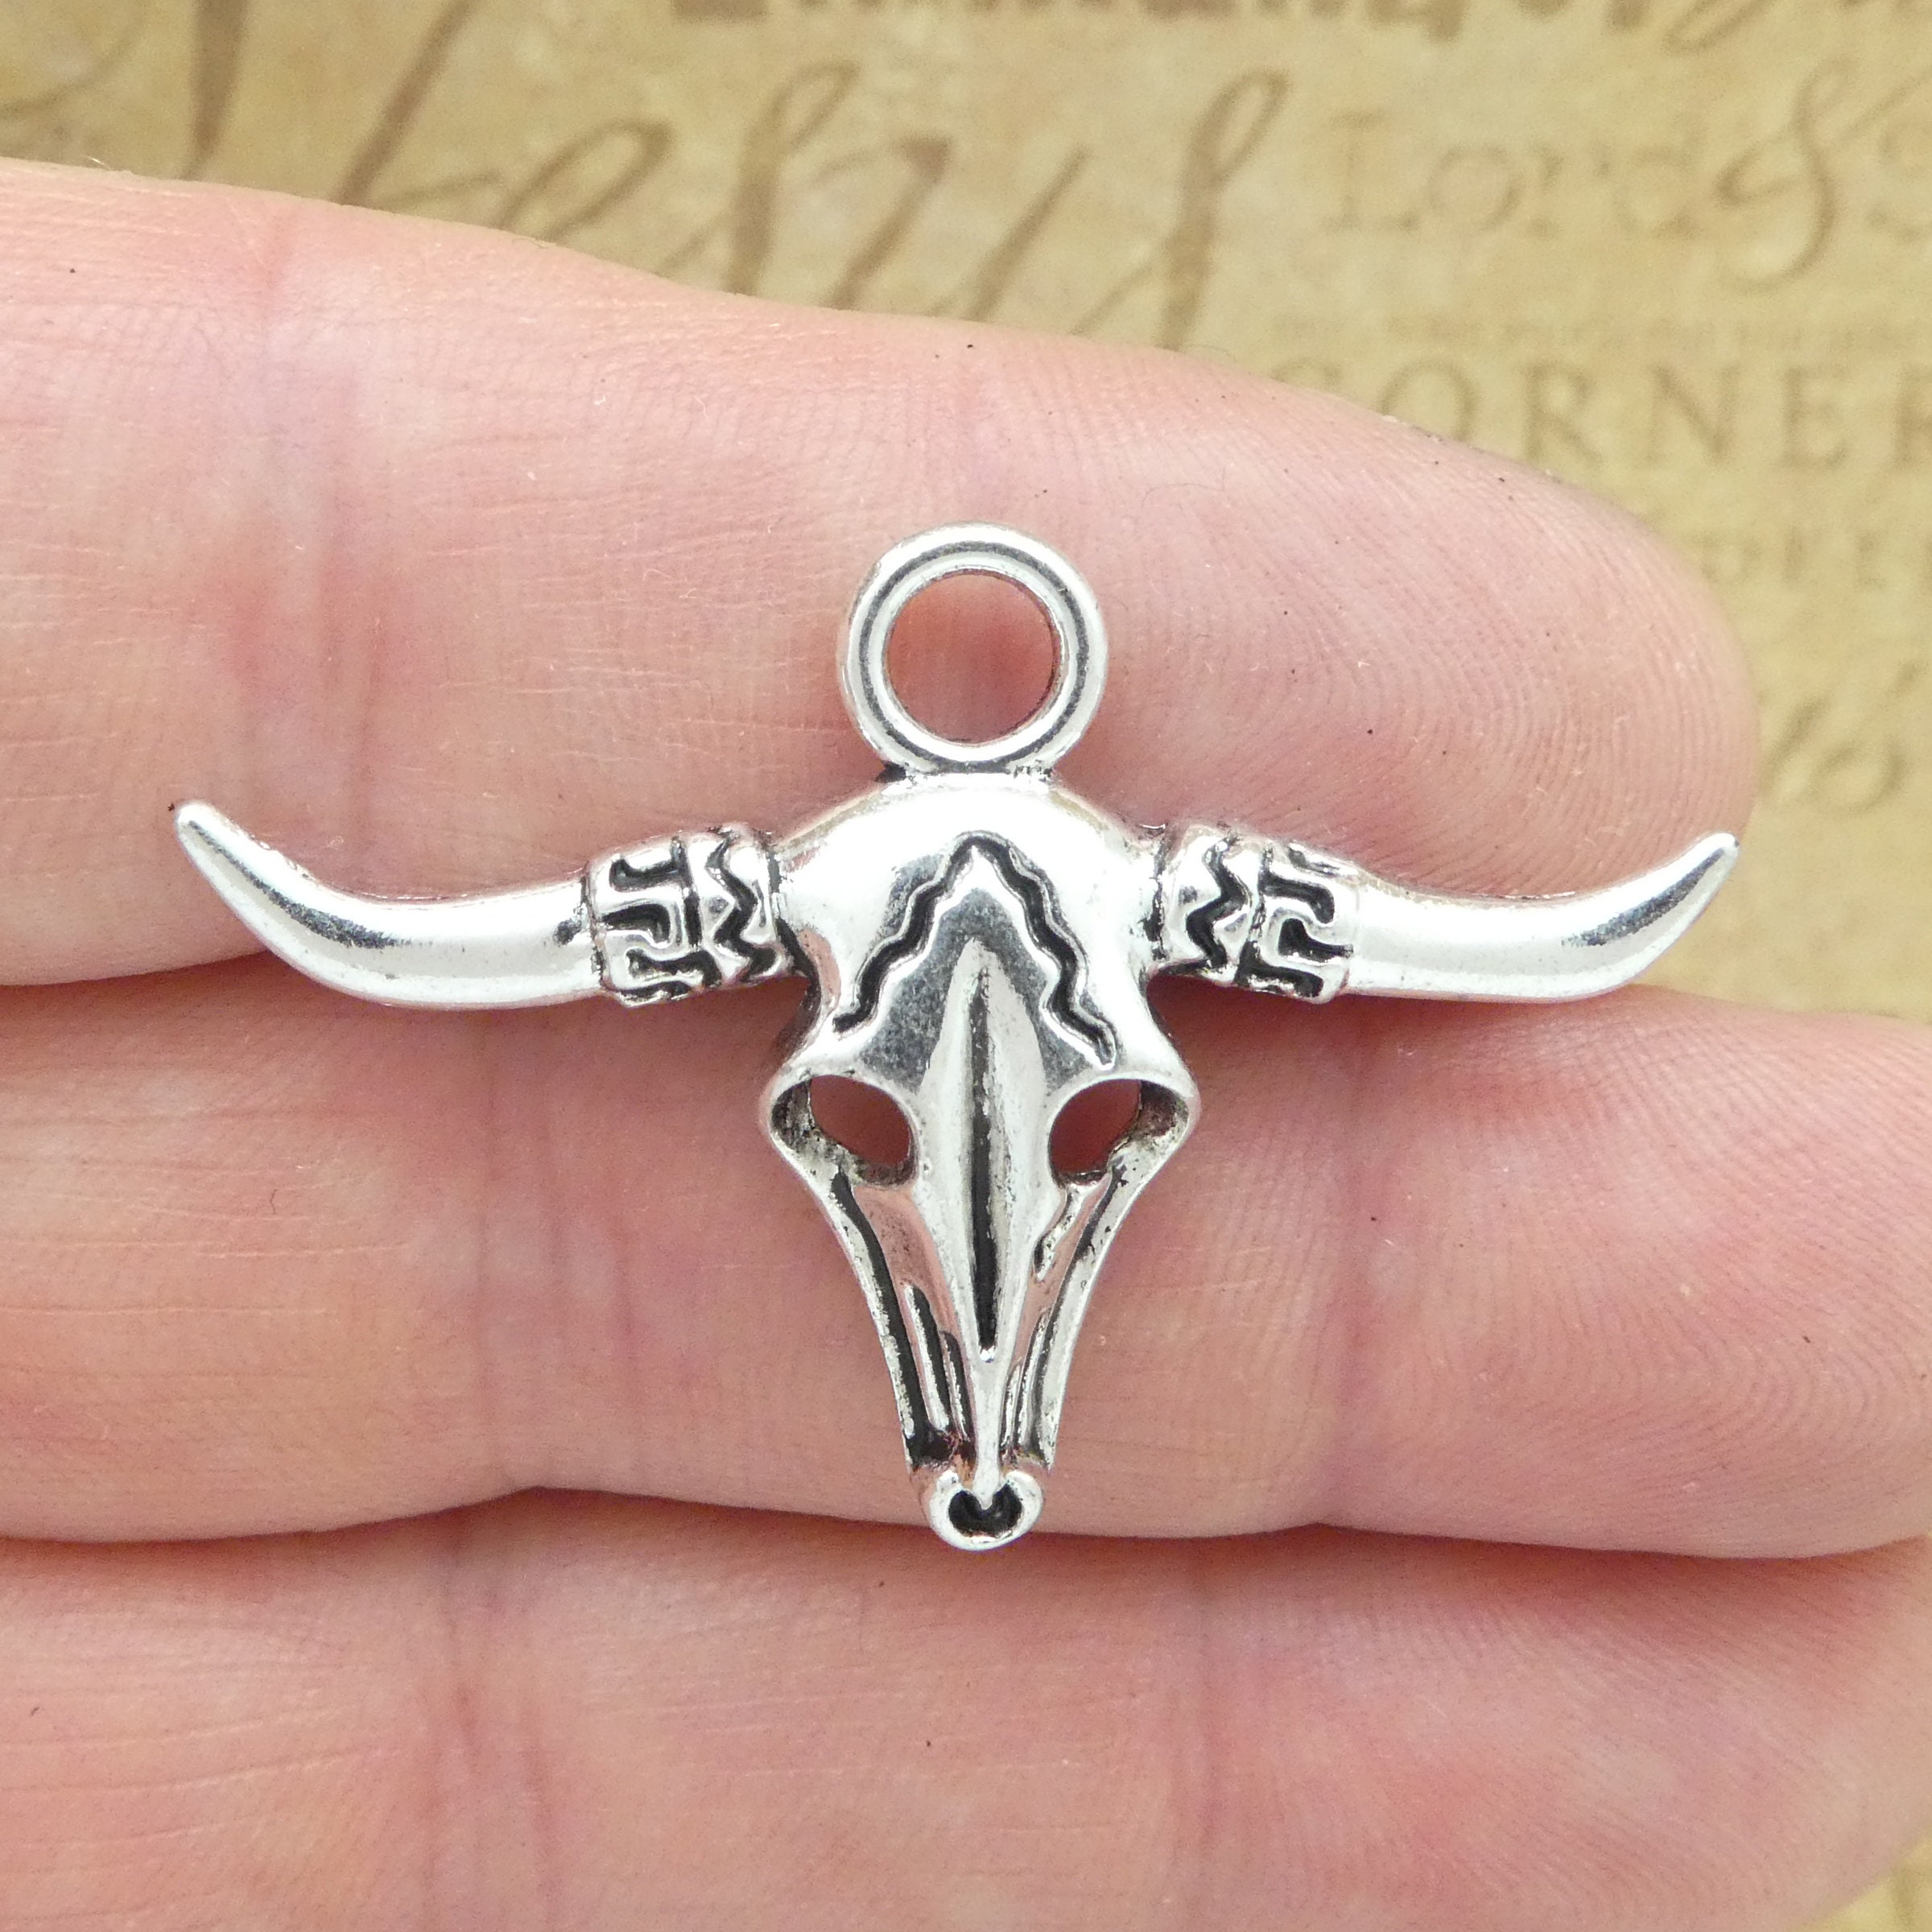 Bull Skull Pendant Charms for DIY Jewelry Supplies |BestBeaded Silver / 6 Pcs